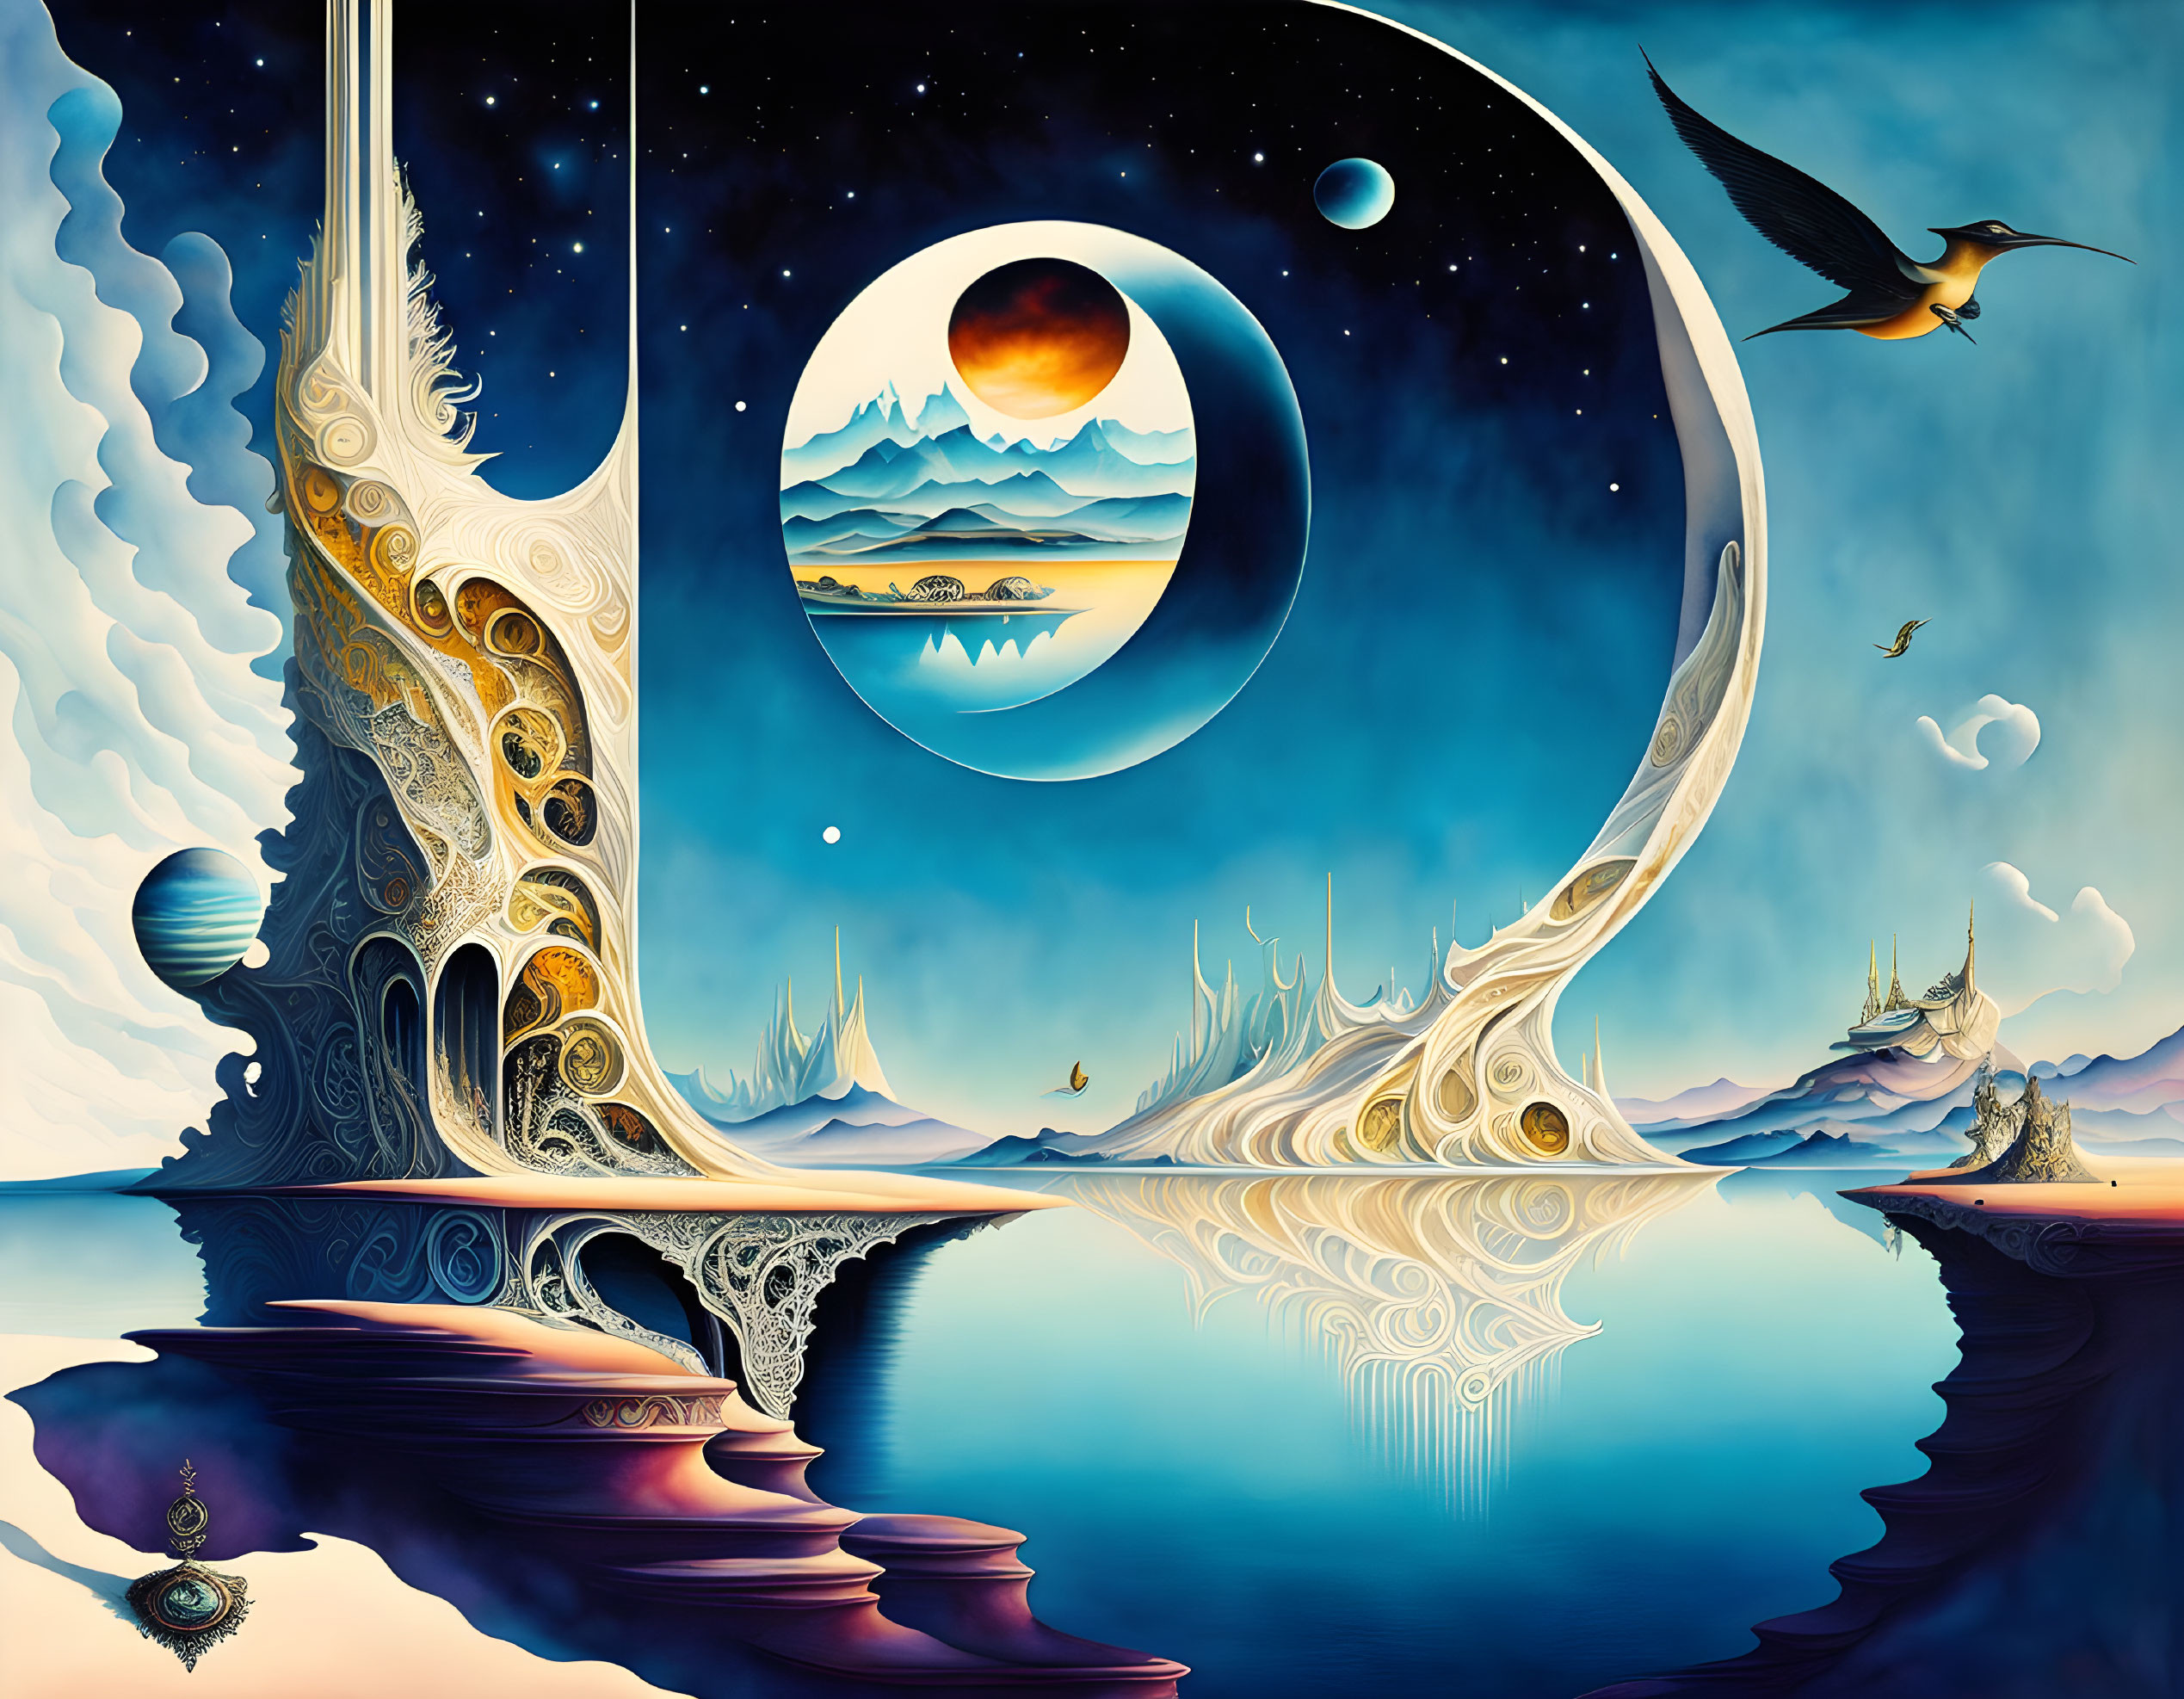 Surreal landscape with crescent structure, bird, floating islands, and celestial bodies